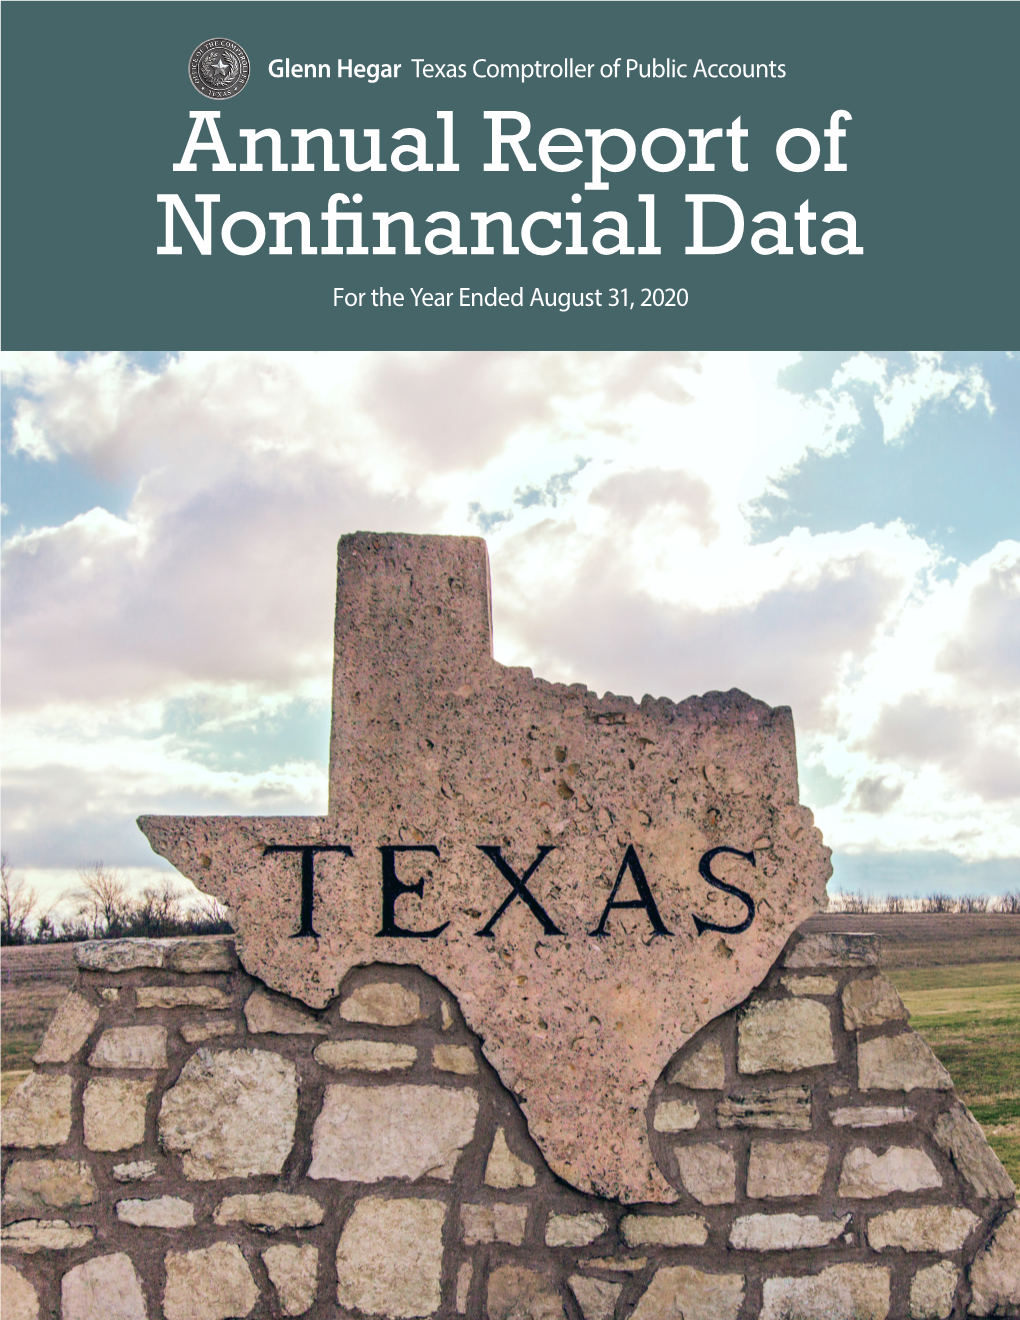 Annual Report of Nonfinancial Data for the Year Ended August 31, 2020